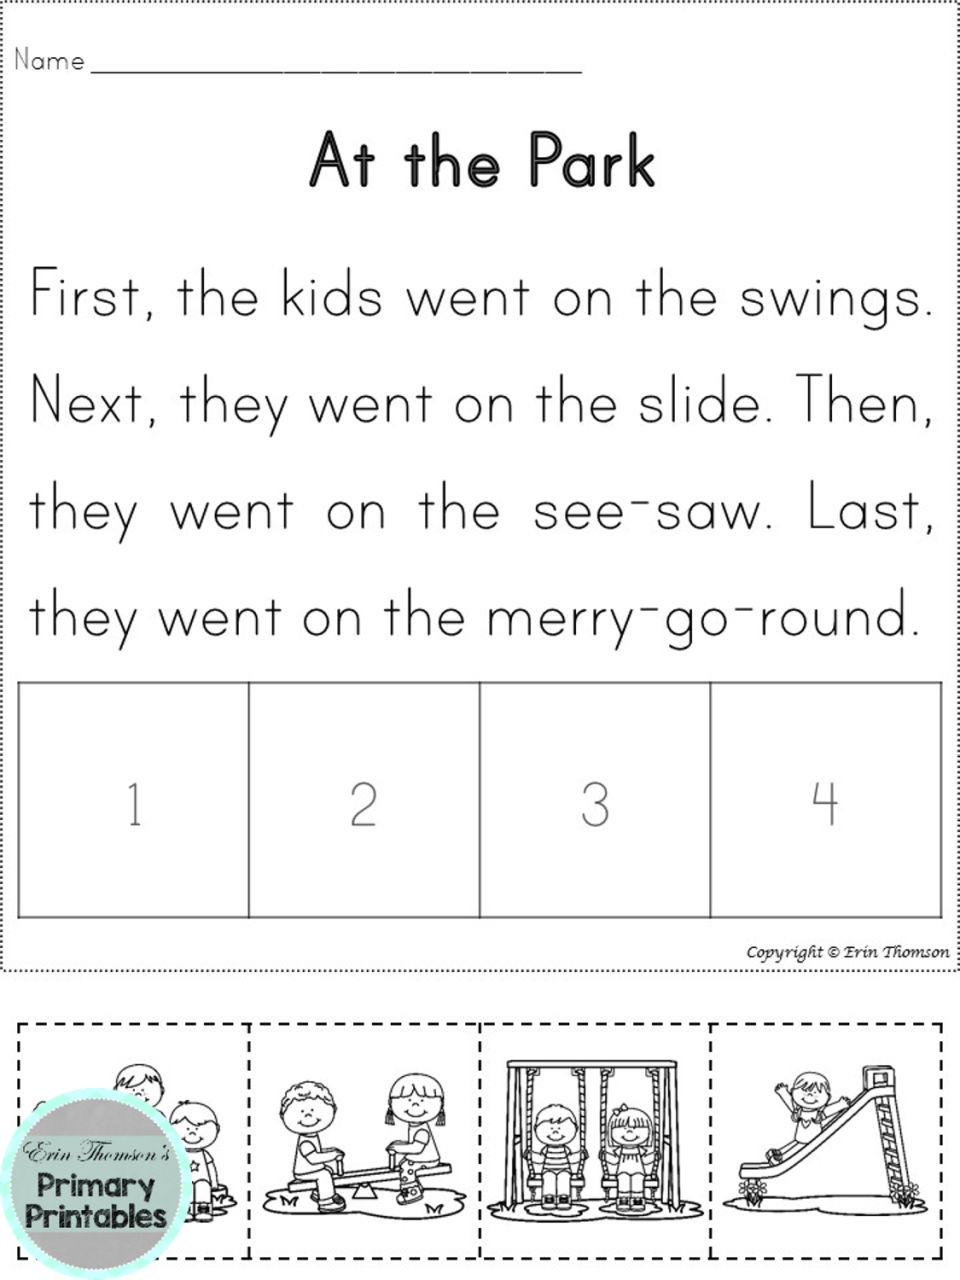 Grade 4 Sequencing Events In A Story Worksheets